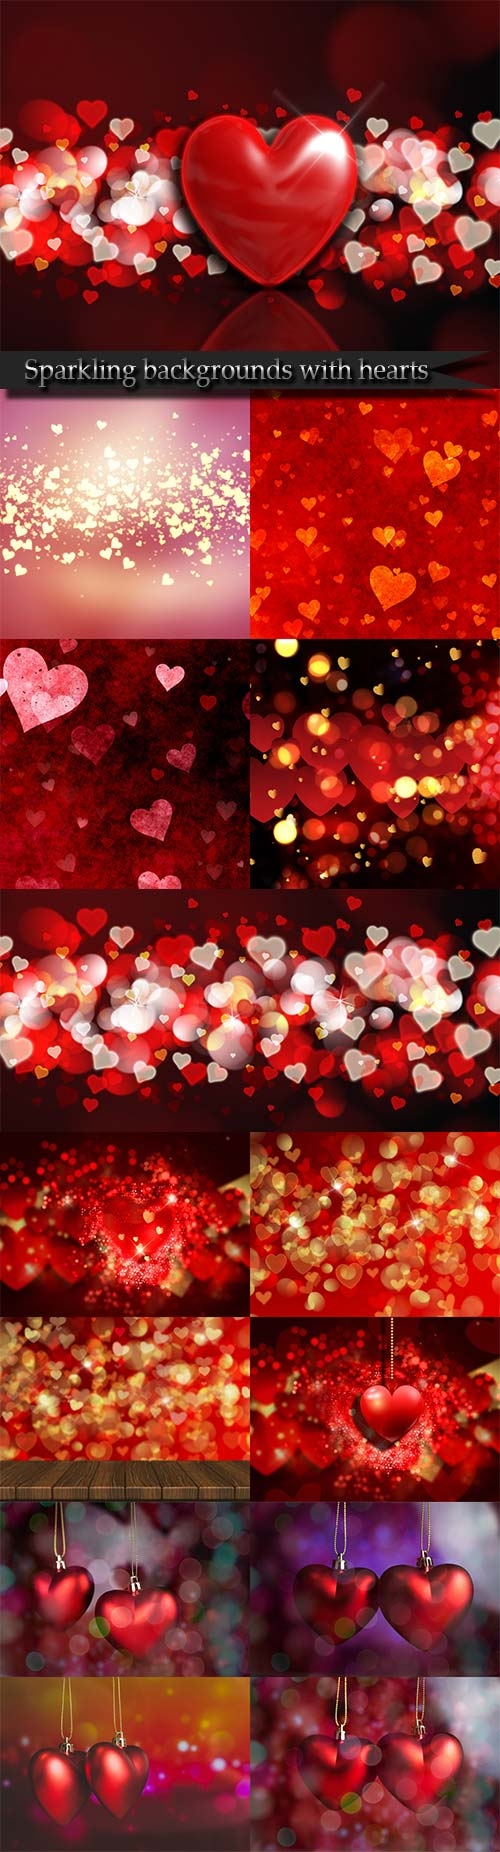 Sparkling backgrounds with hearts